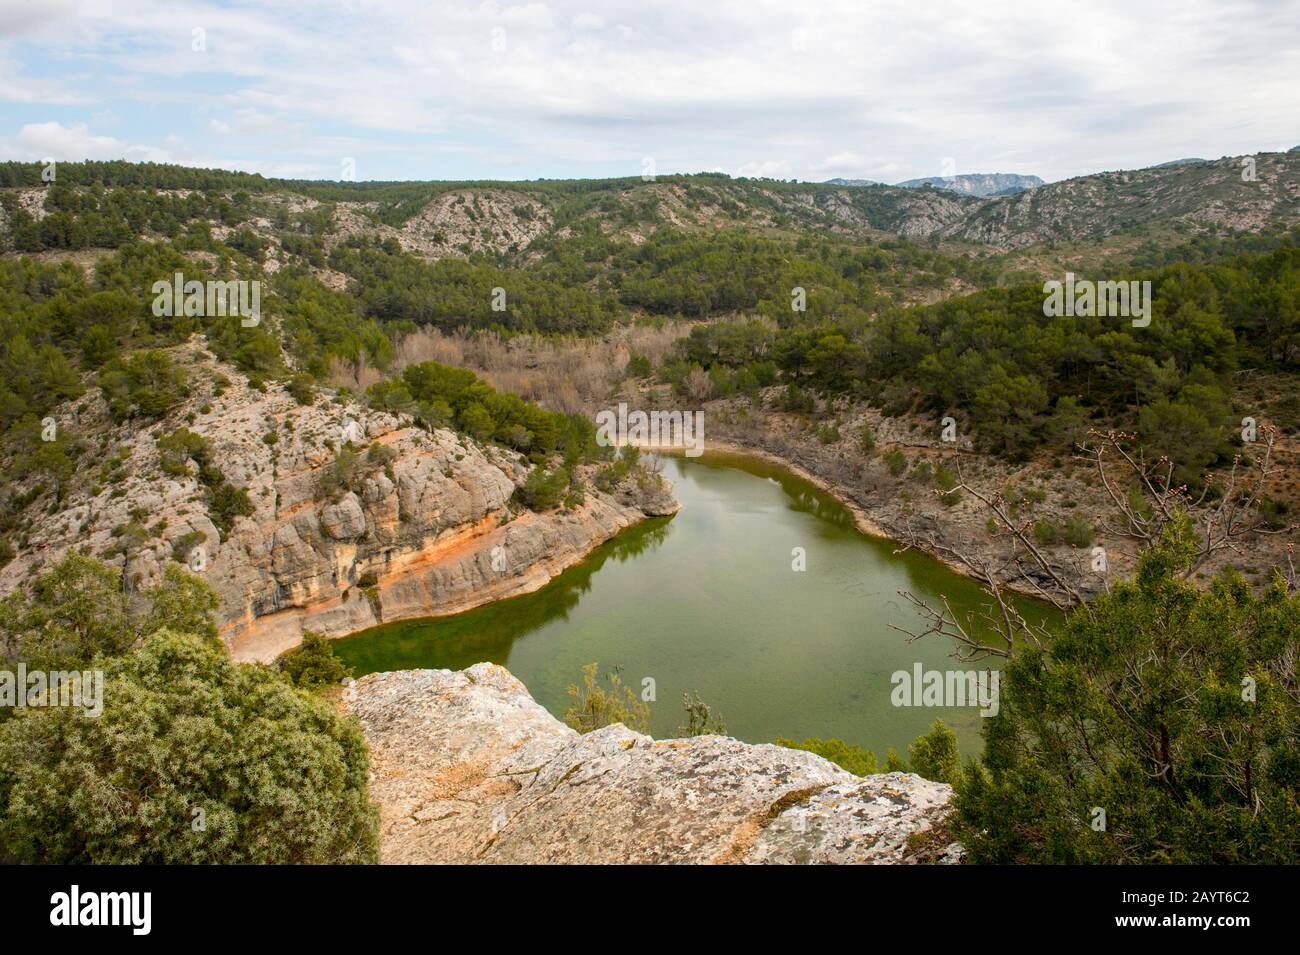 View of the lake created by the Francois Zola Dam, which is an arch dam, near the village of Le Tholonet, close to Aix-en-Provence, France. Stock Photo